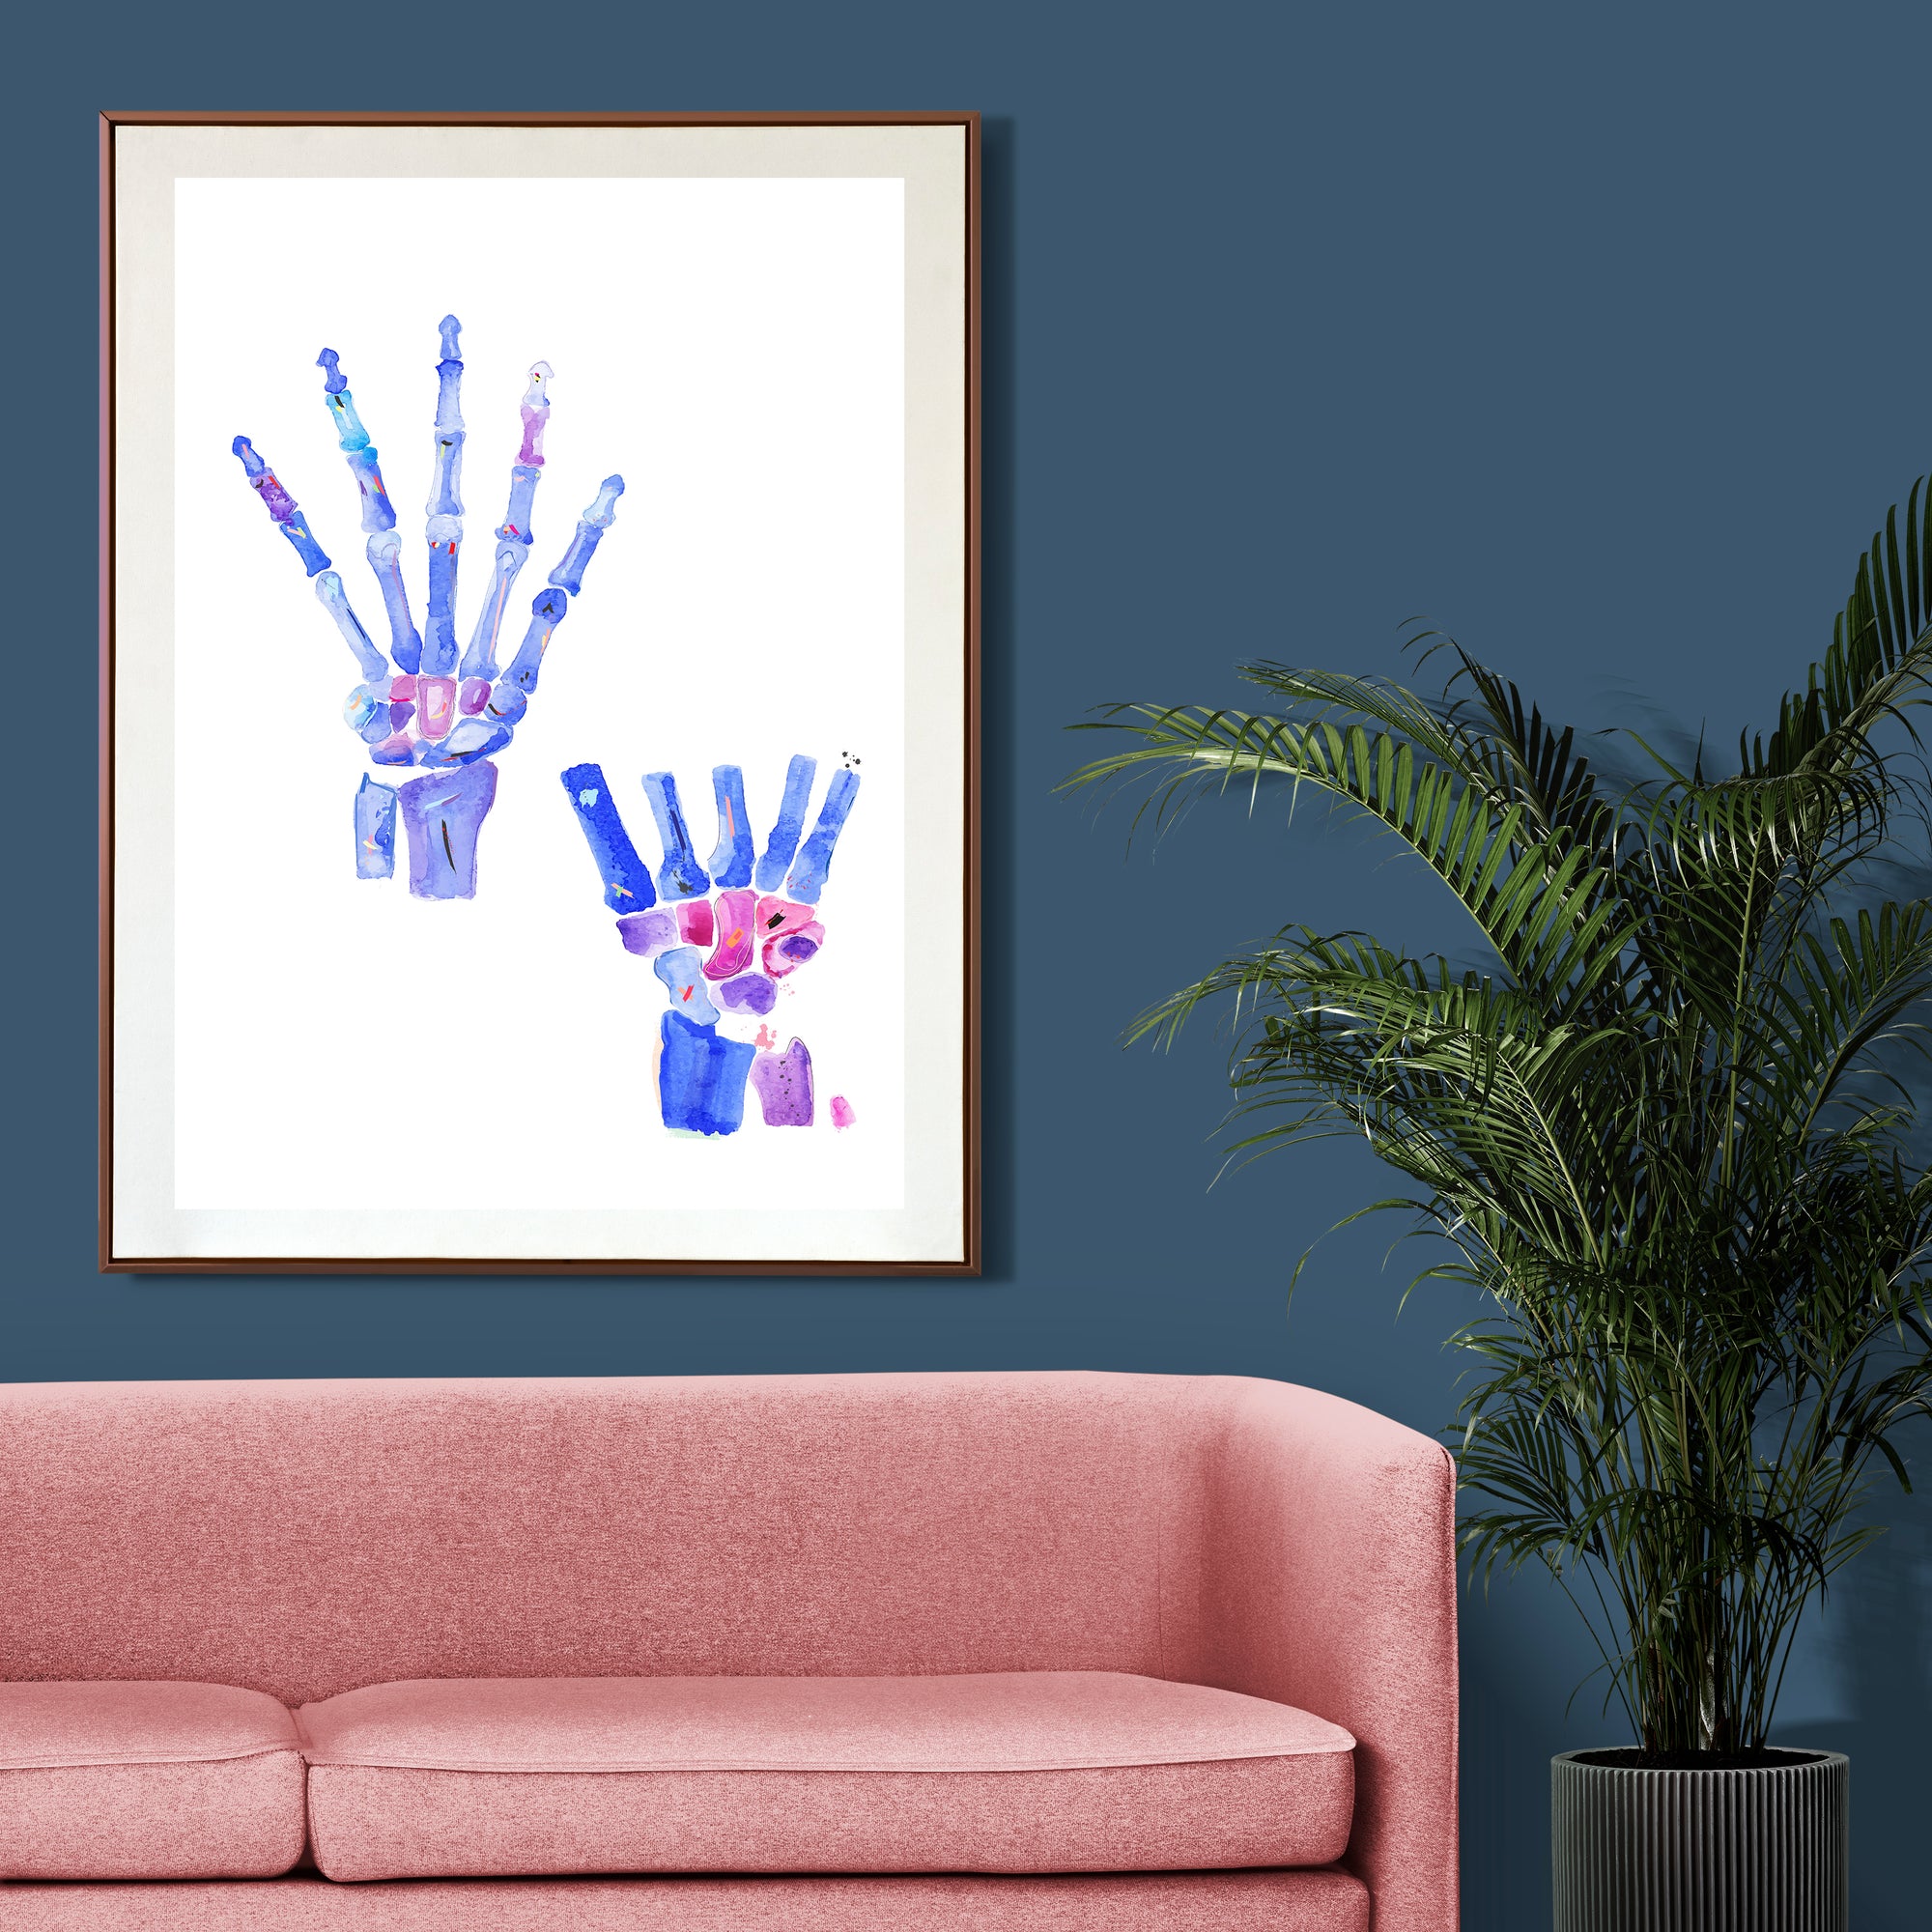 Hand and Wrist Anatomy, Orthopedic Surgery Art, Physical Therapy Office Decor